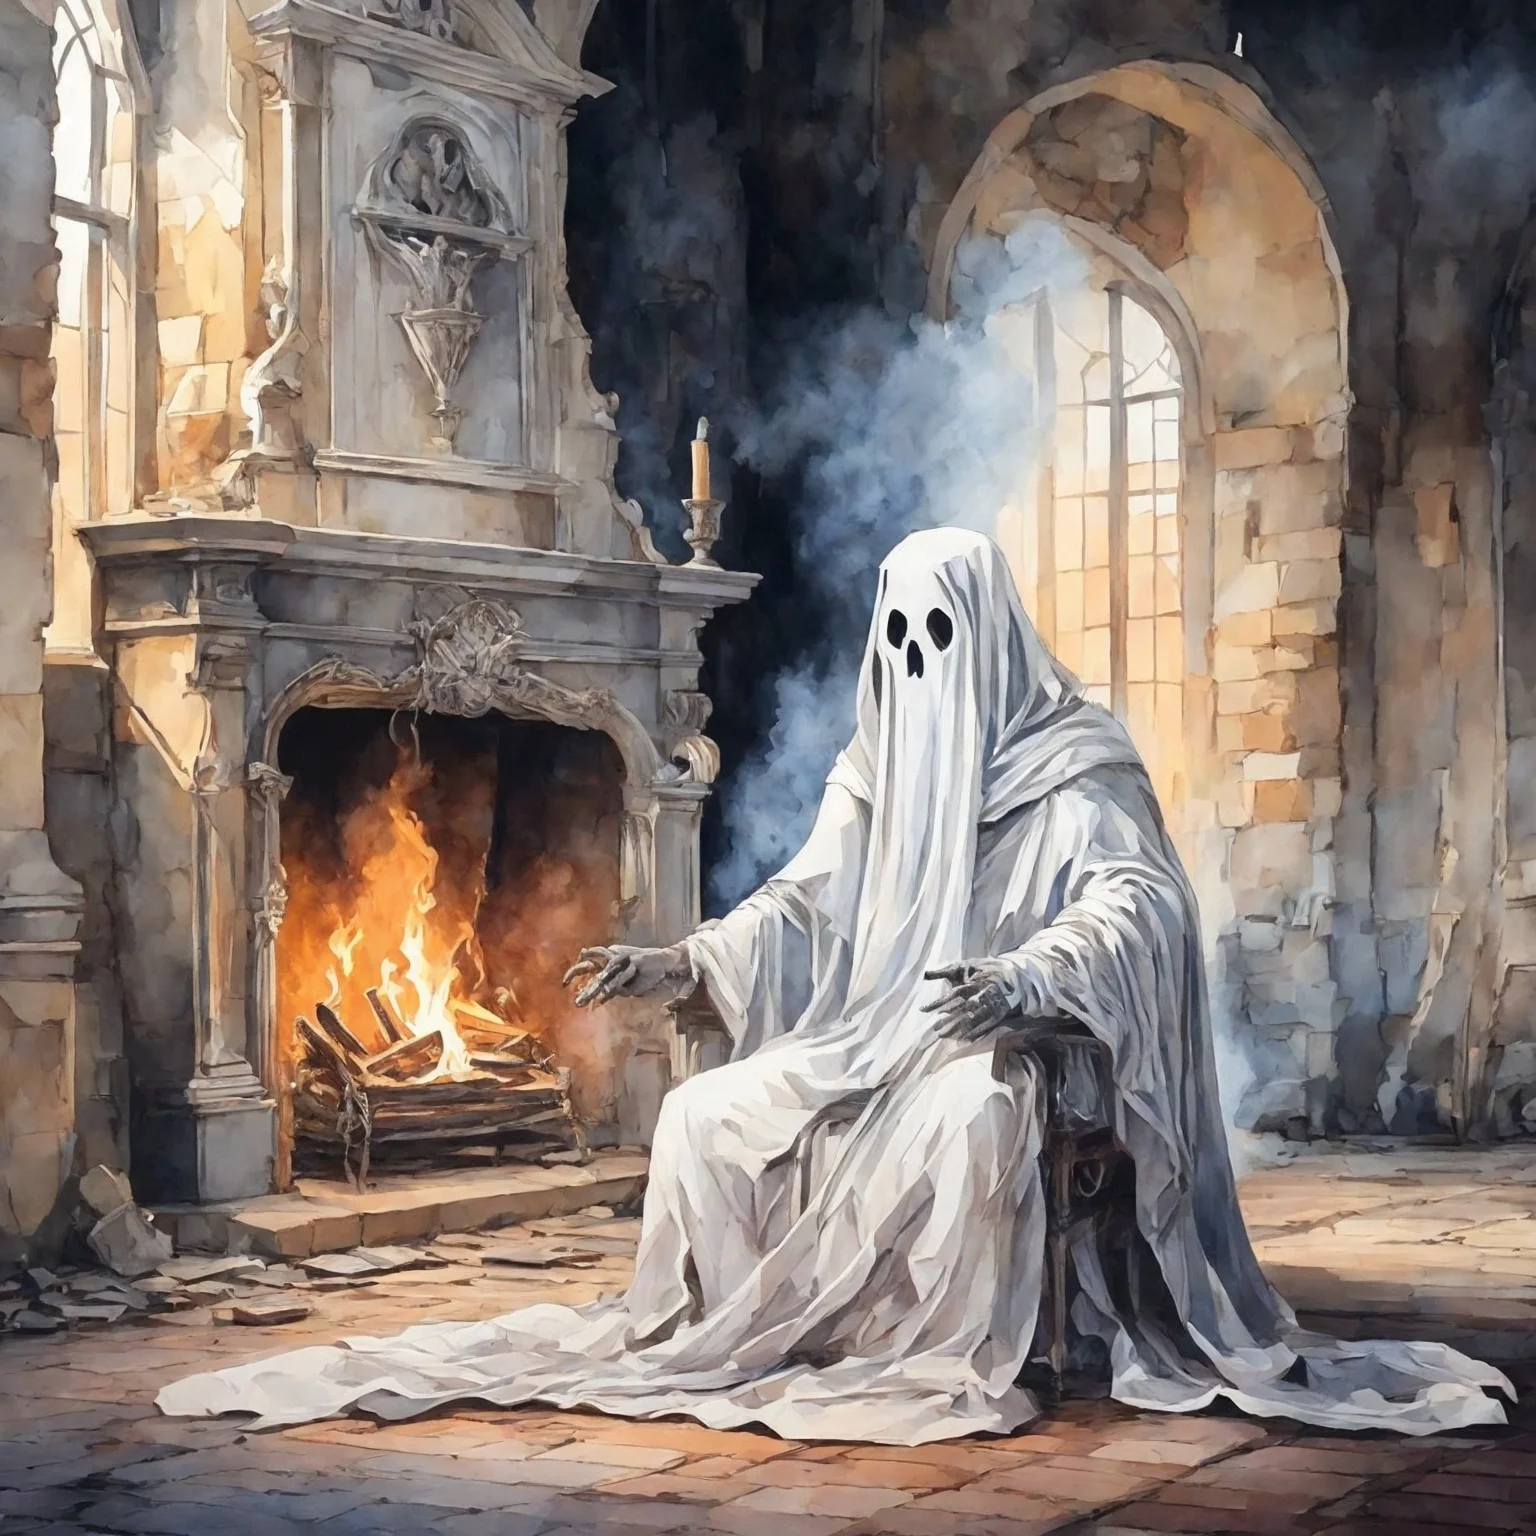 watercolor ghost sitting in a chair by the fireplace